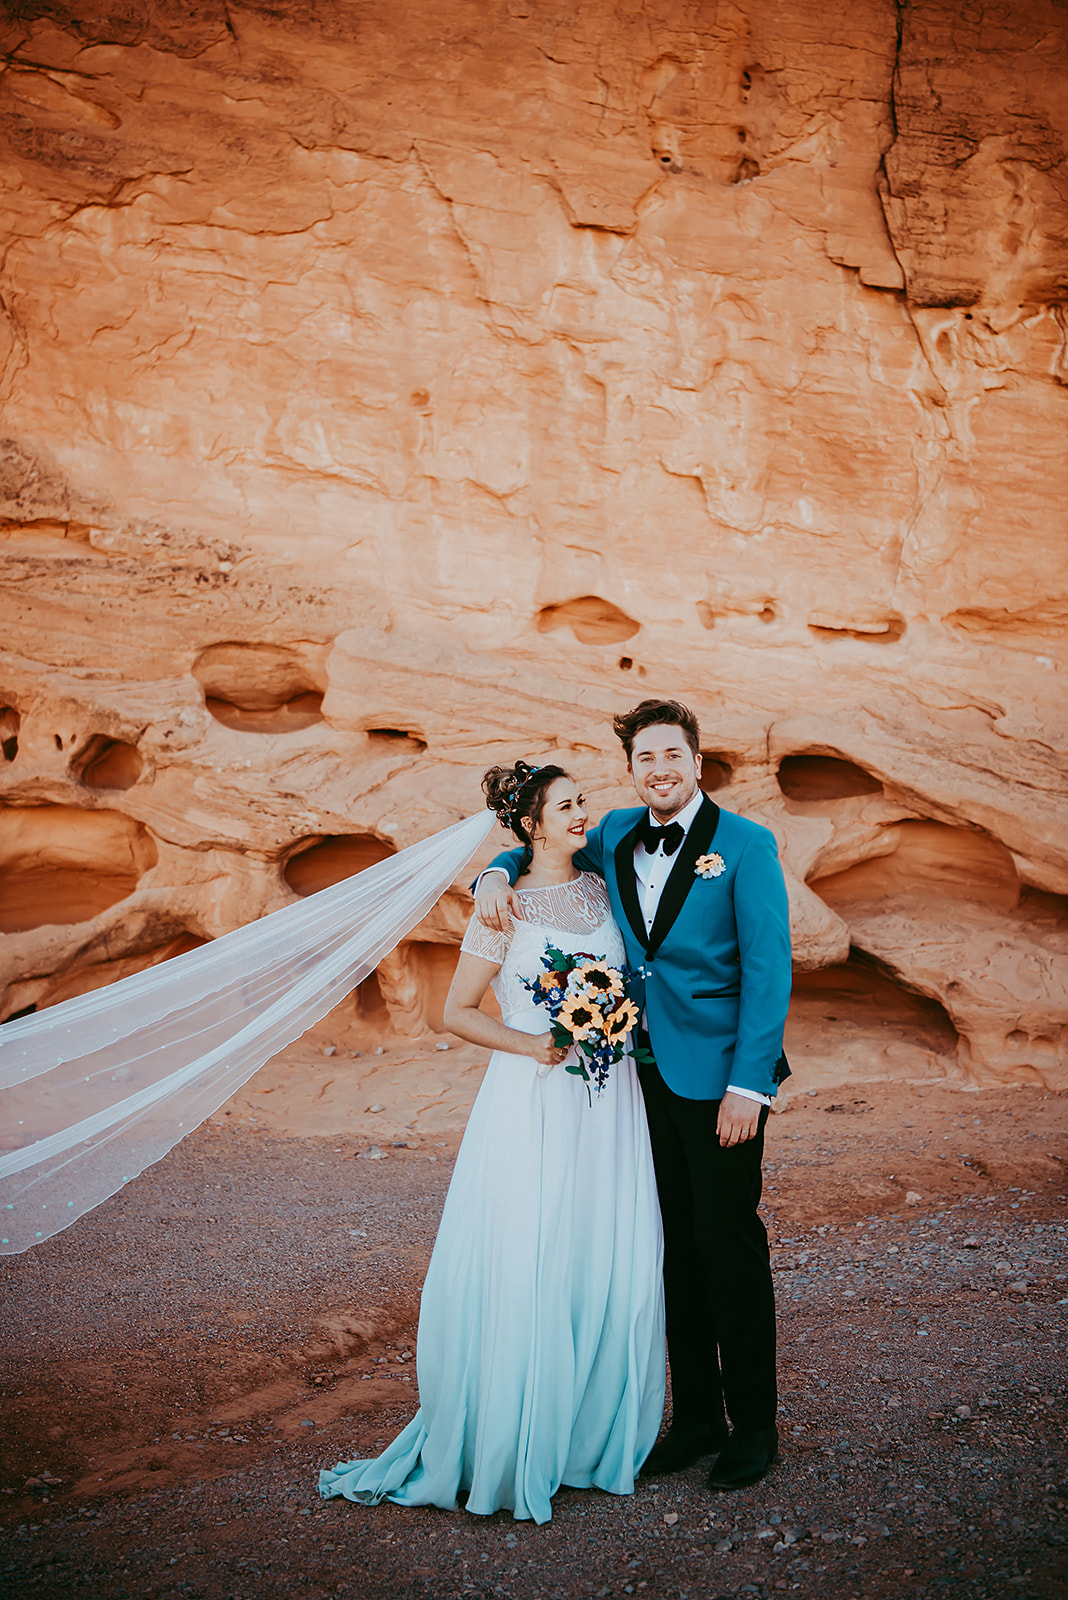 This teal and turquoise wedding was a fully vegan one and took place in Vegas, around red rocks